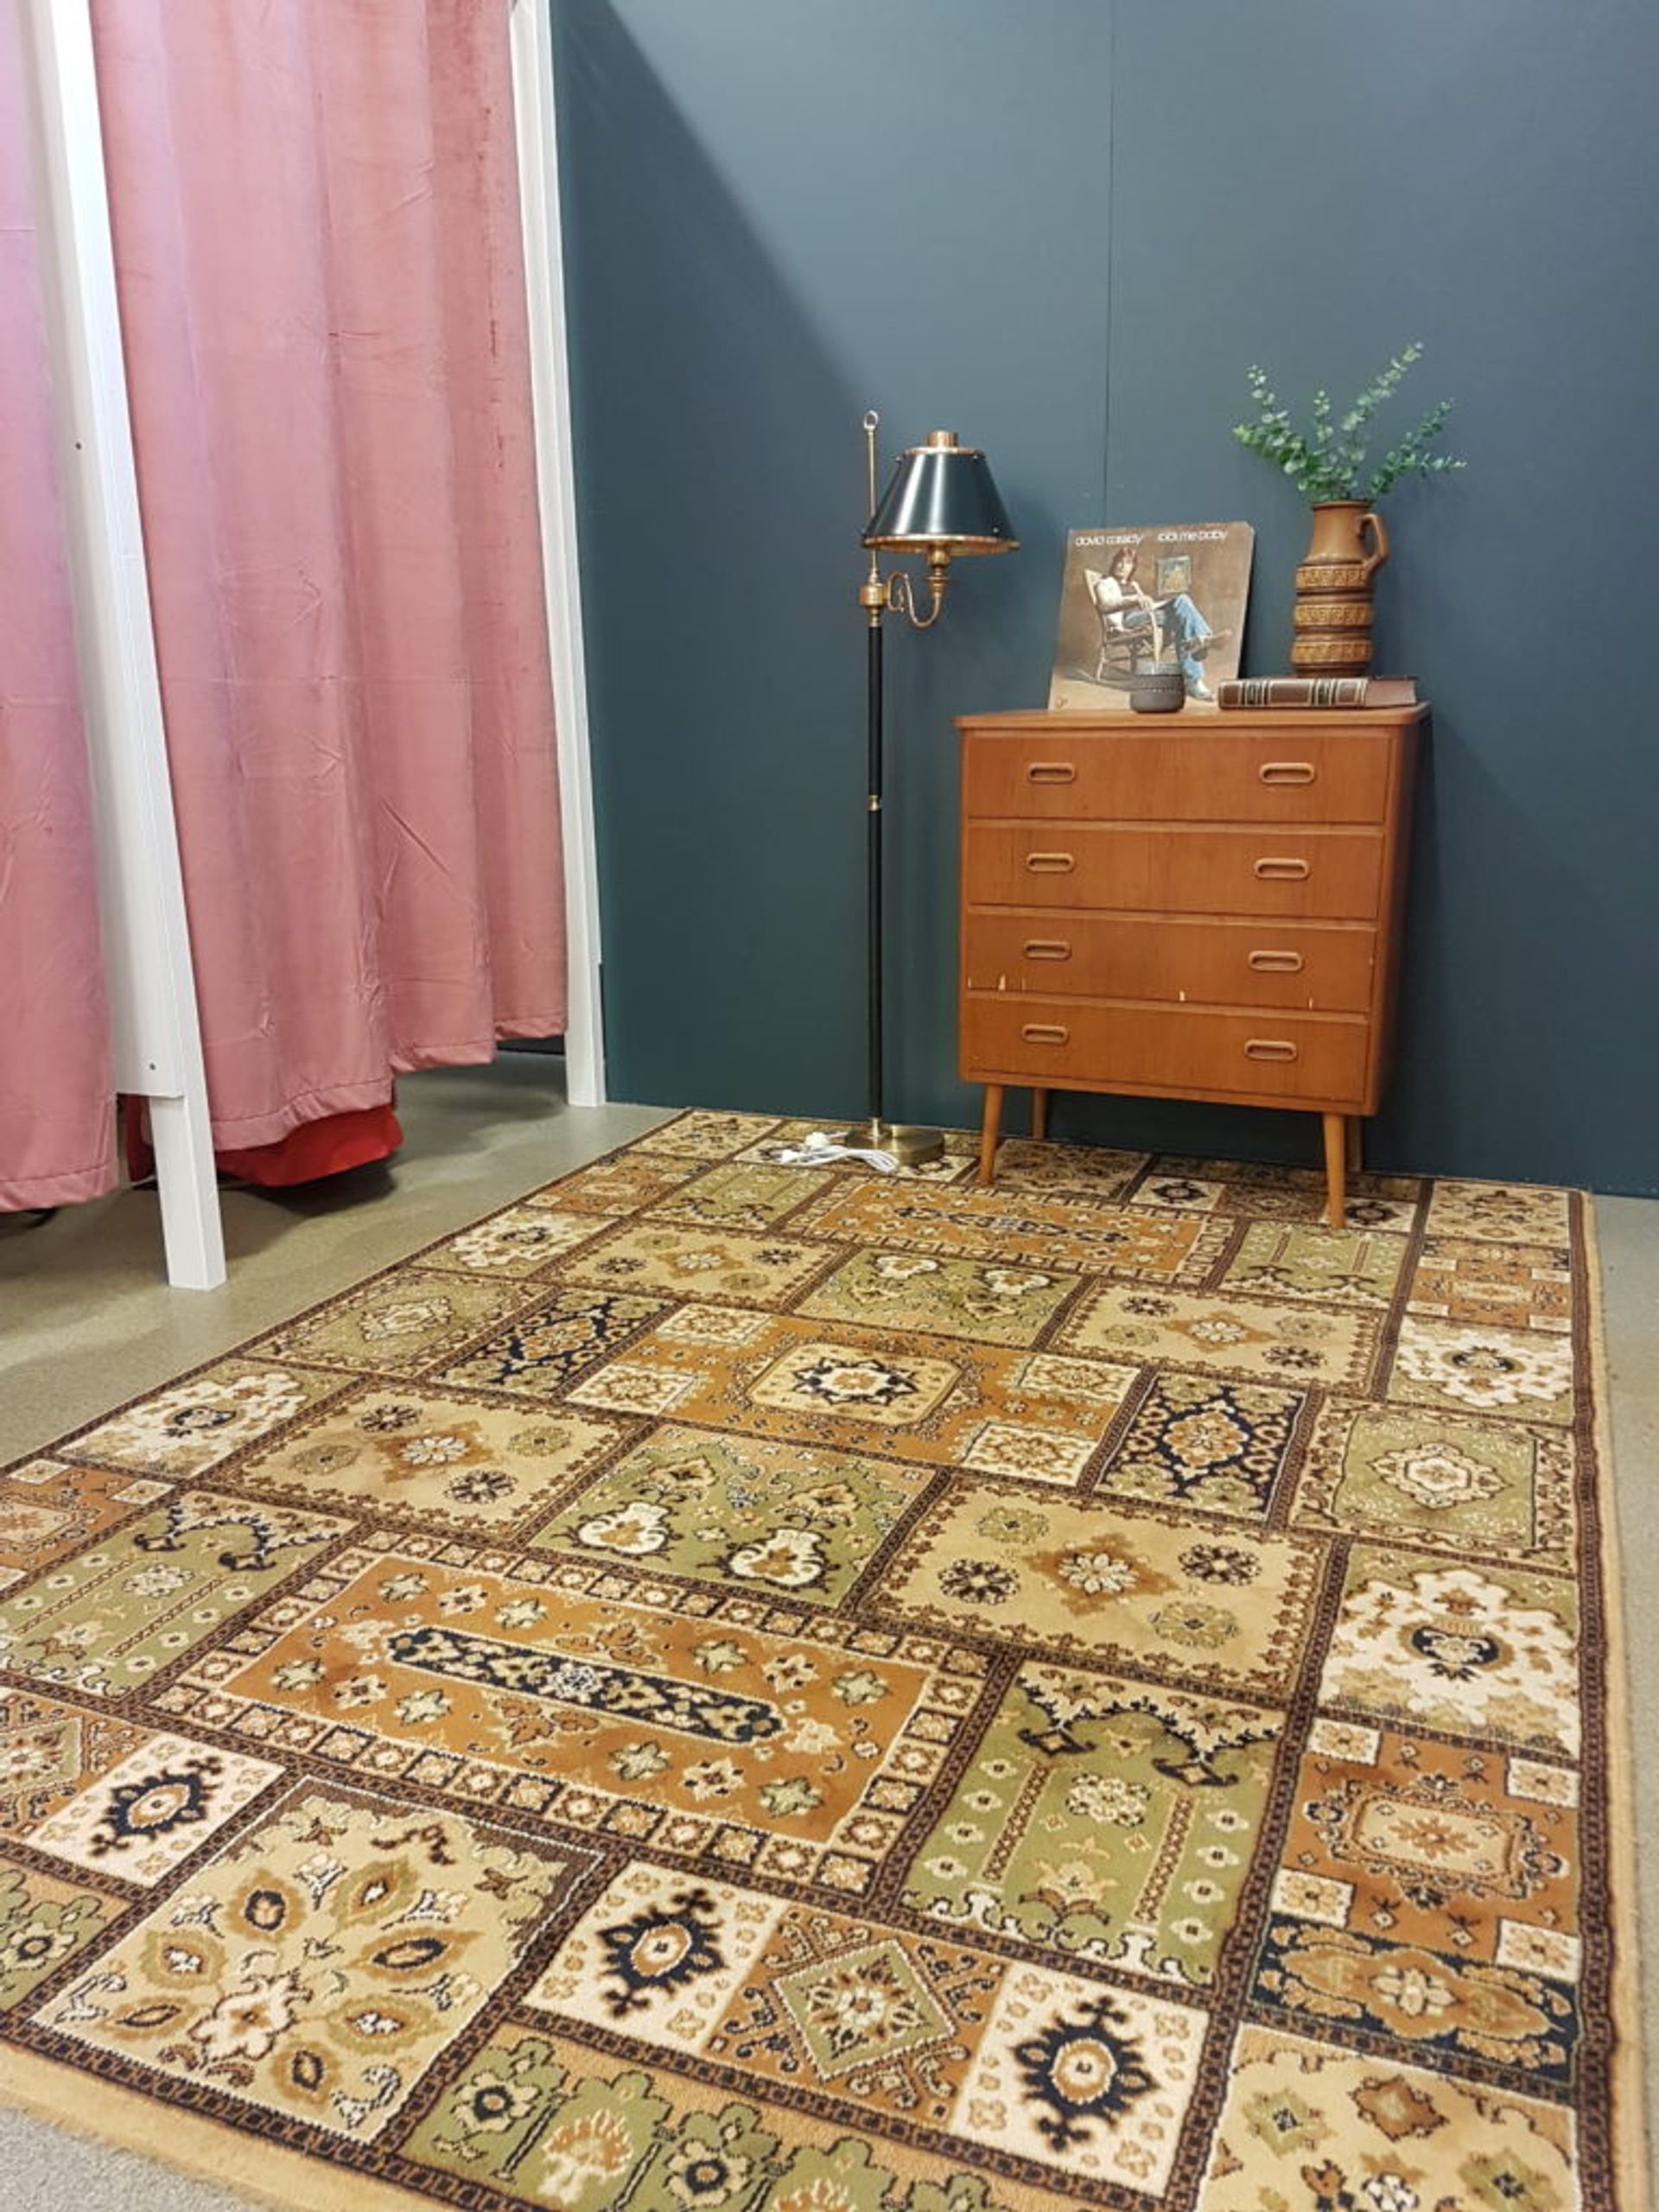 Teak sideboard and vintage rug outside of a store's changing rooms.